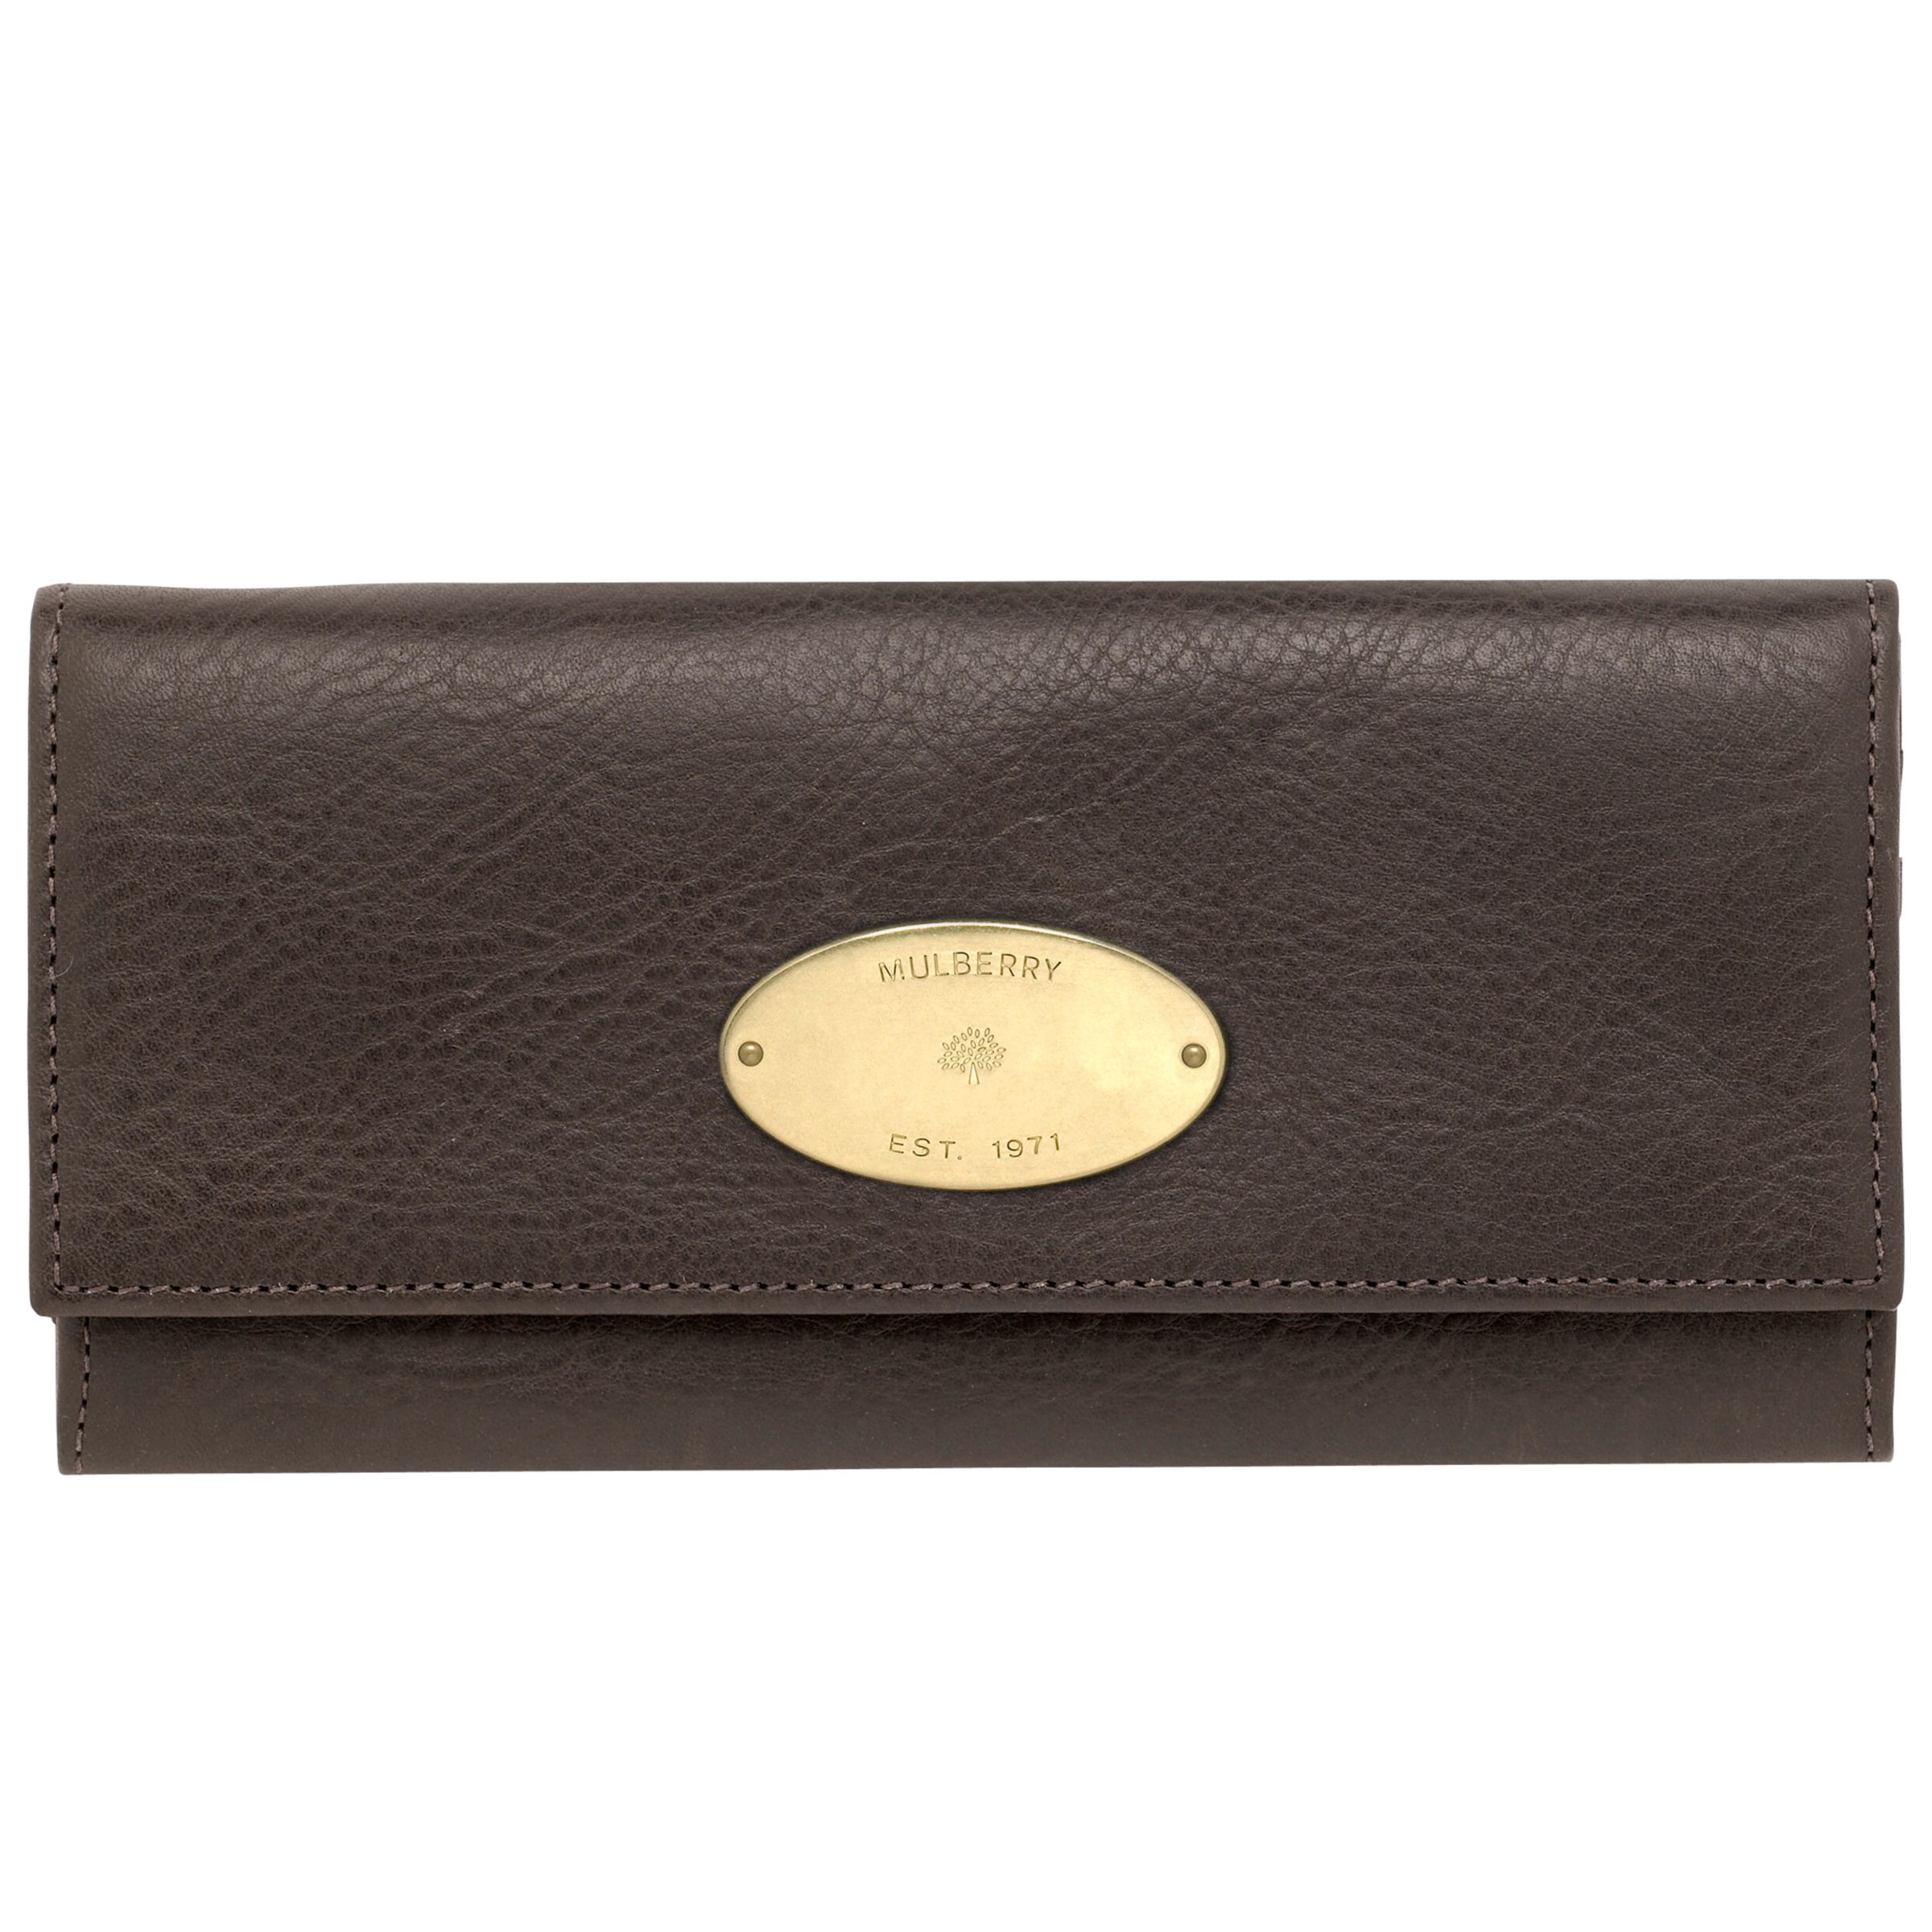 Mulberry Continental Purse, Chocolate at John Lewis